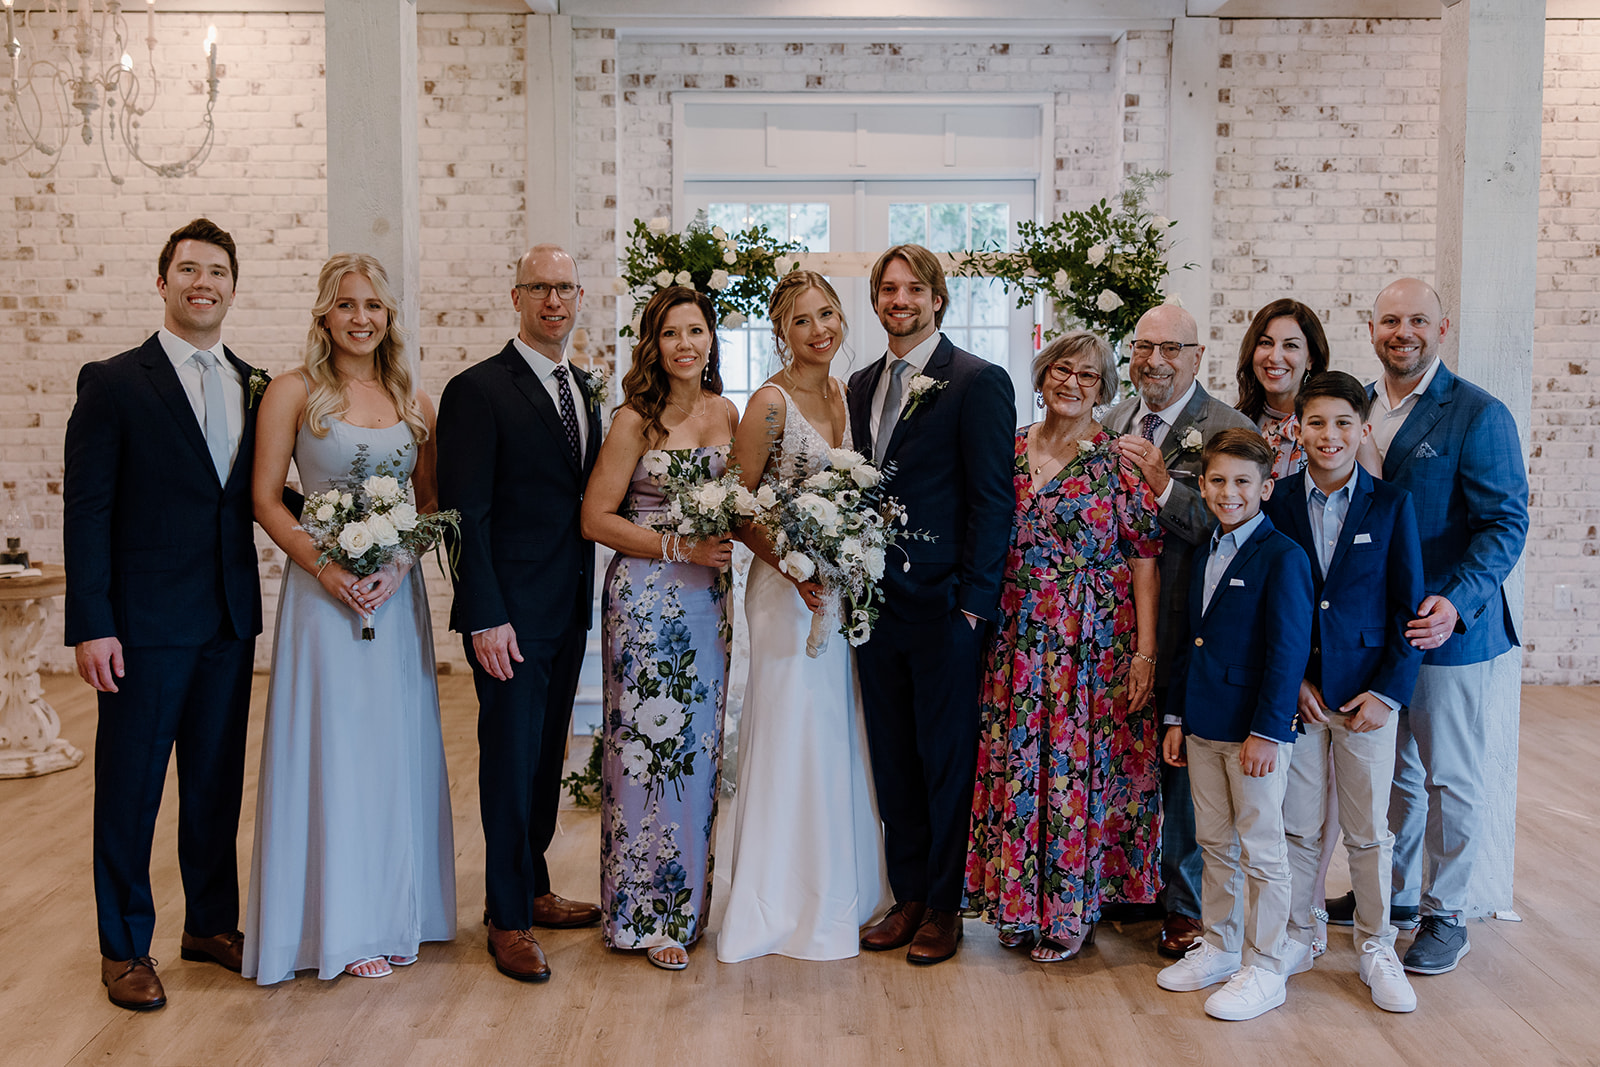 The families pose together on their children's dreamy Georgia wedding day at wildflower barn at little river farms